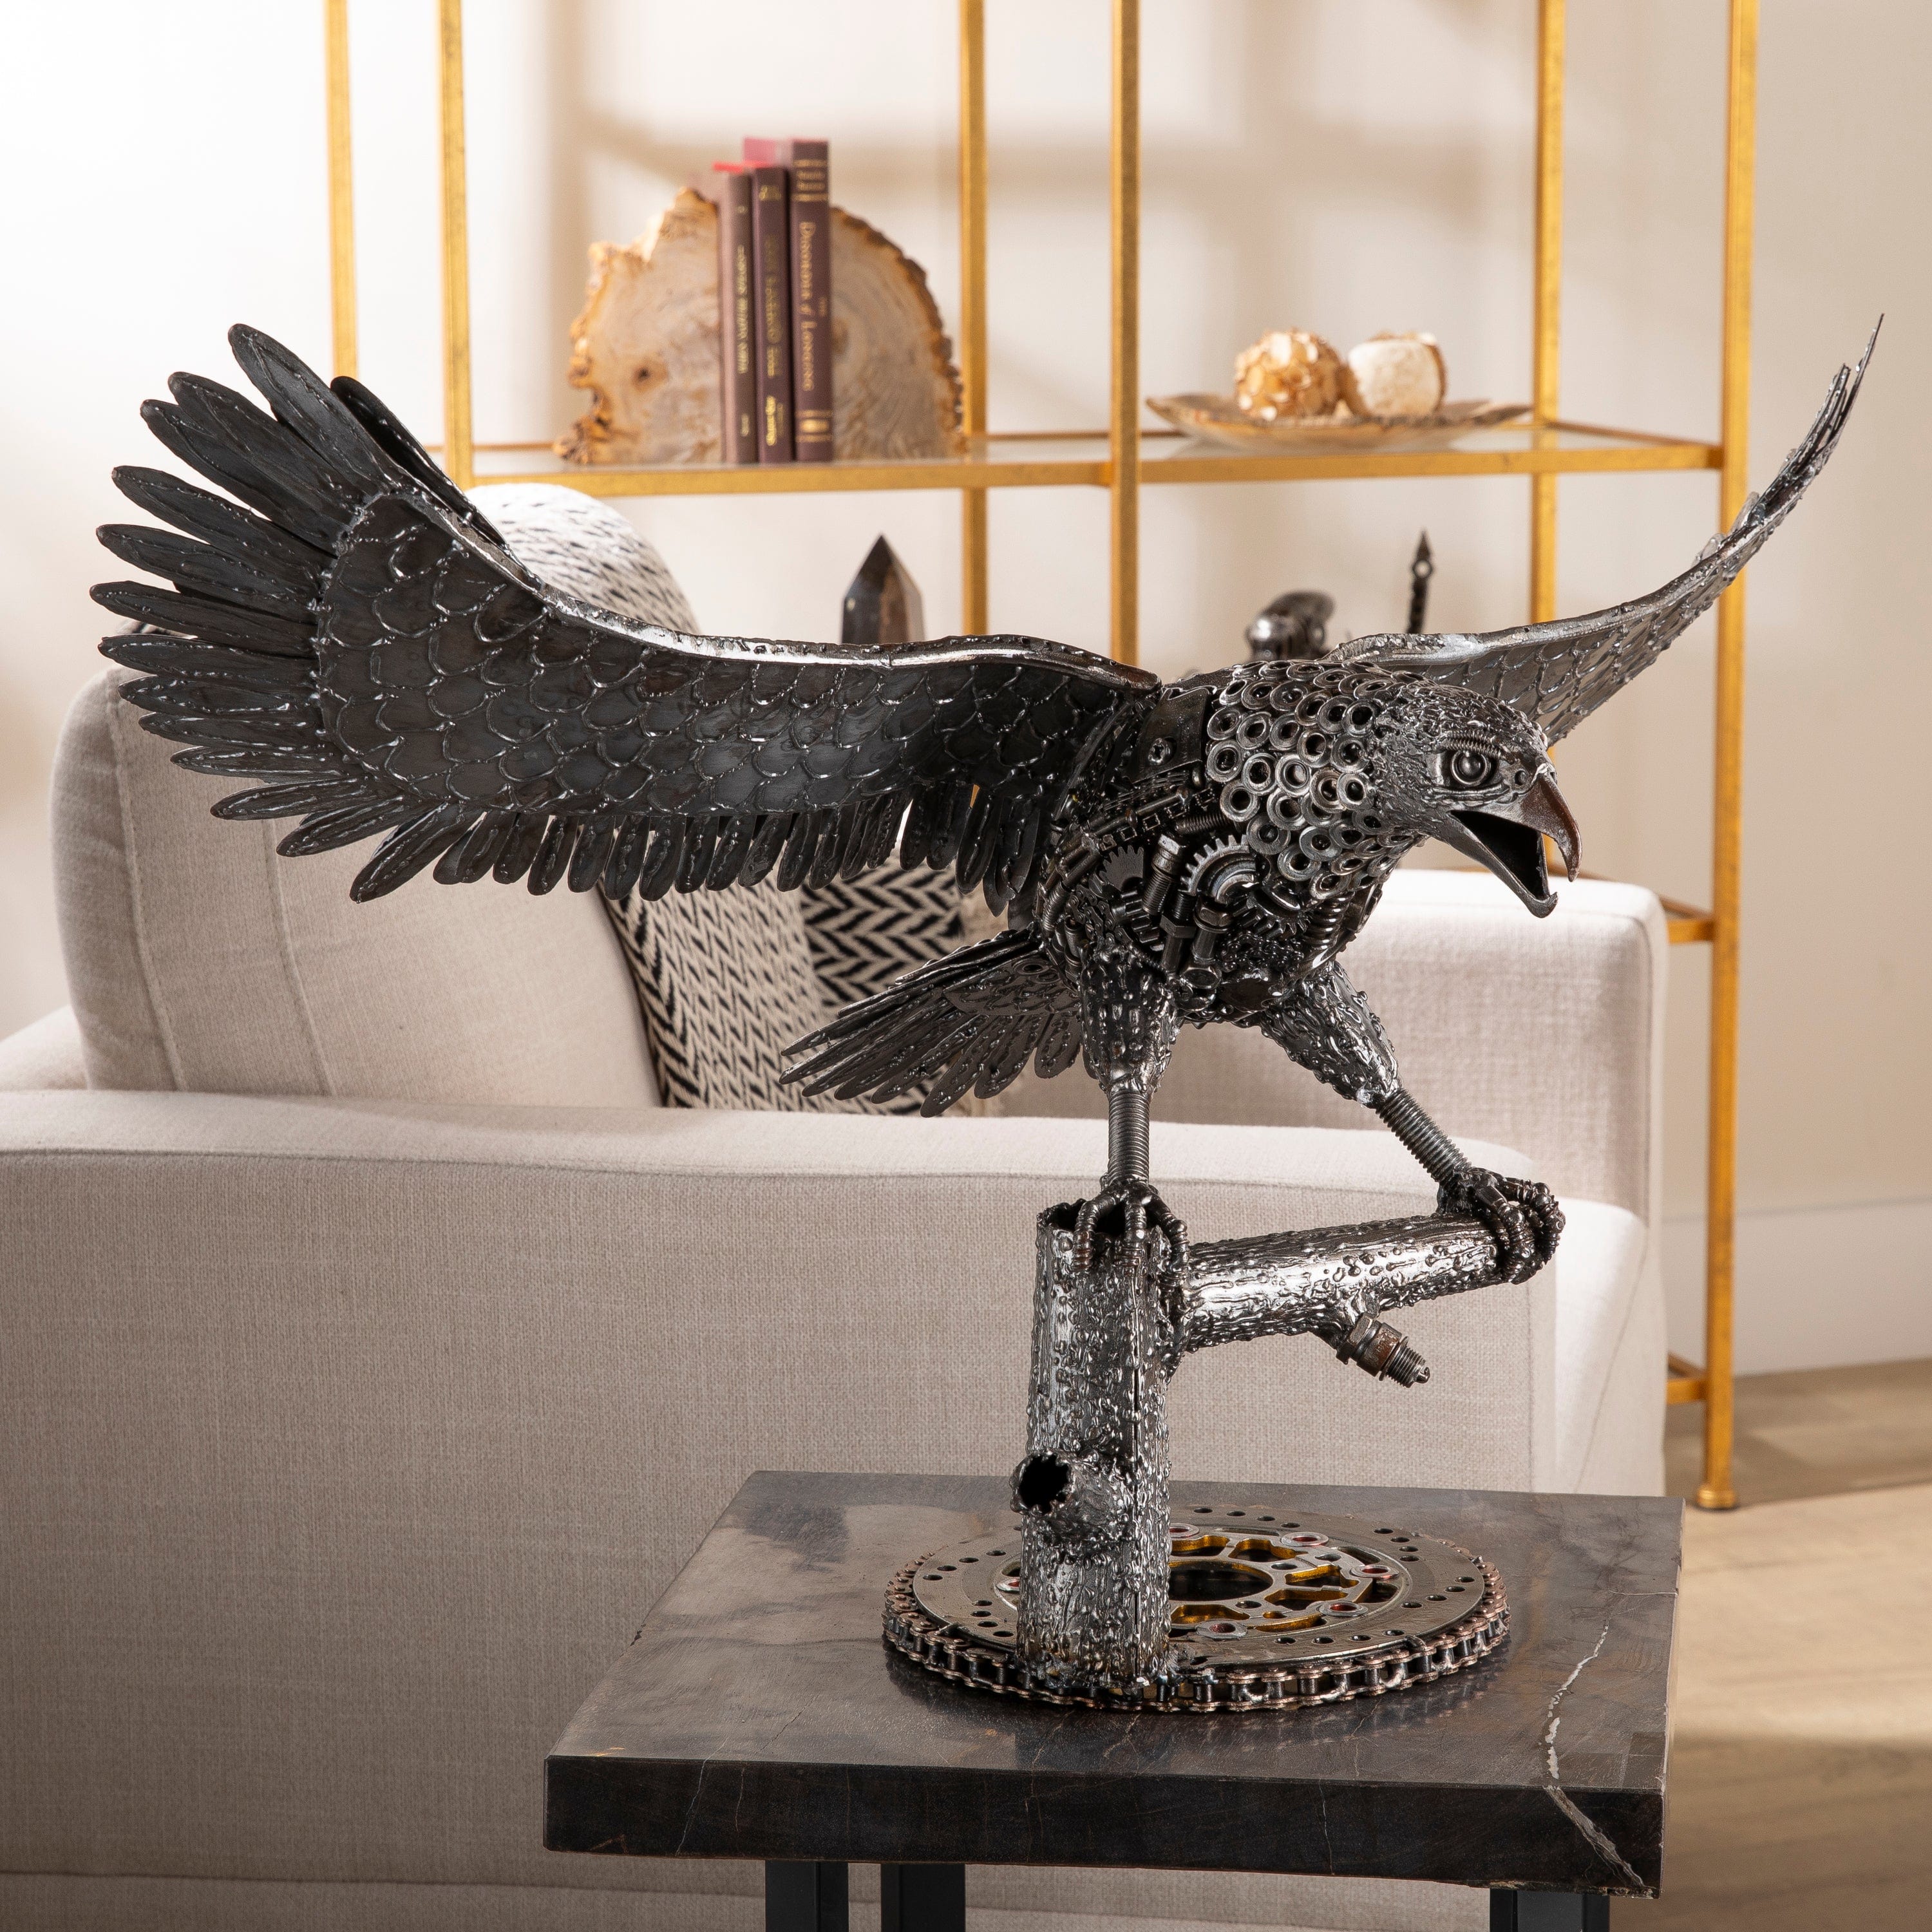 KALIFANO Recycled Metal Art 24" Majestic Eagle Inspired Recycled Metal Art Sculpture RMS-EAG43x60-PK